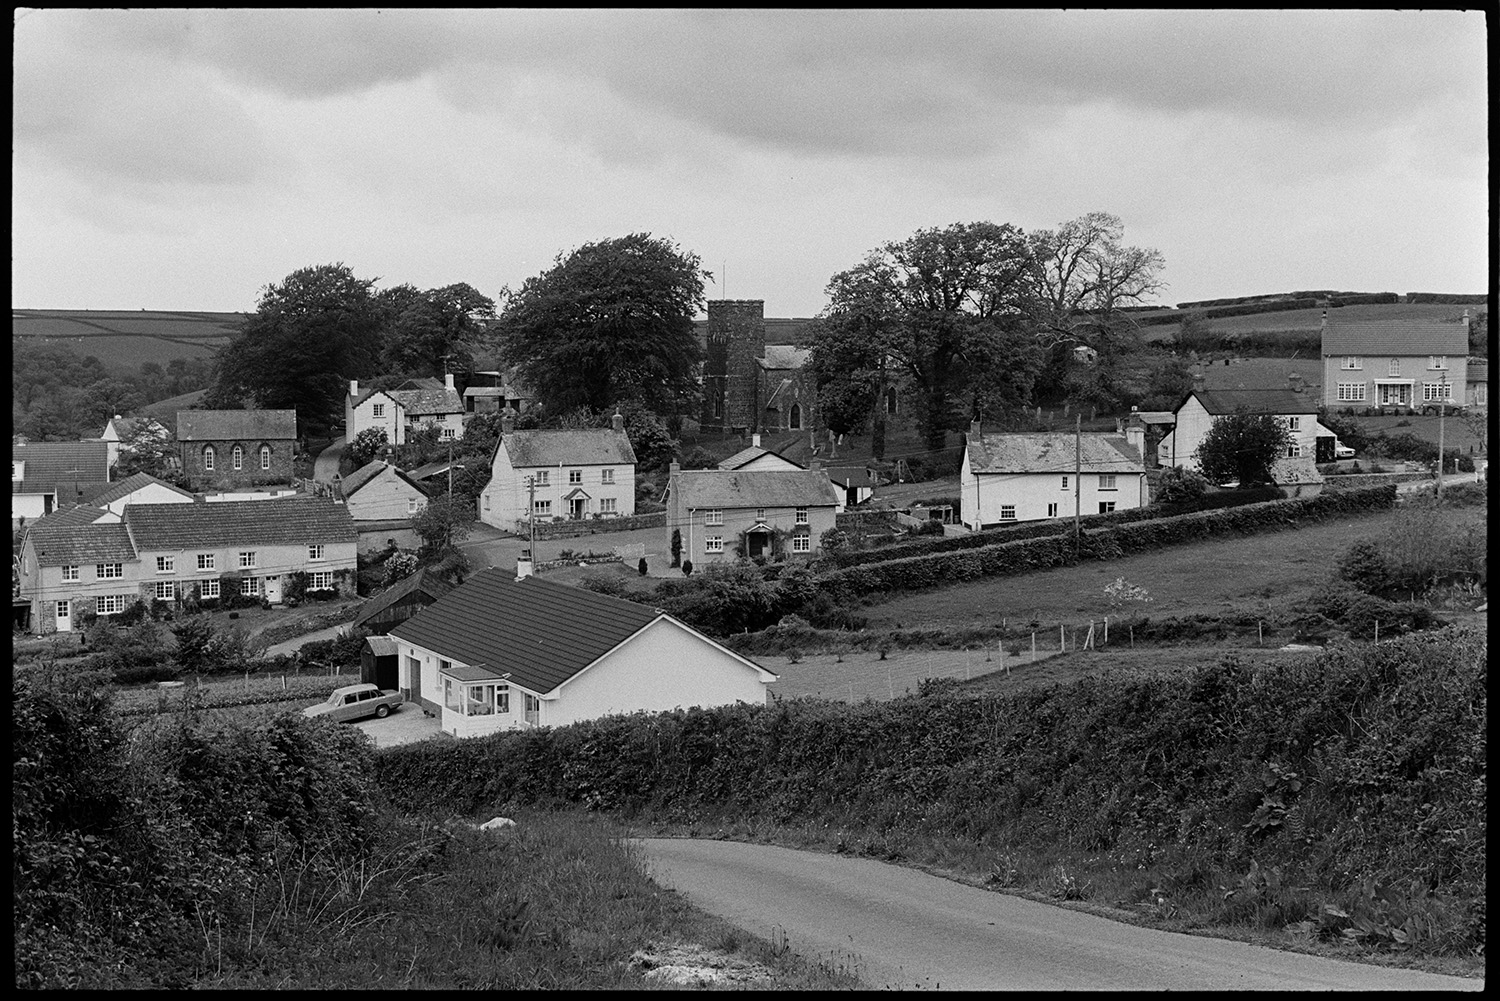 Village and farm, comparison with old photo.
[A view of Meshaw taken from an opposite hillside. The church, chapel and houses are visible.]